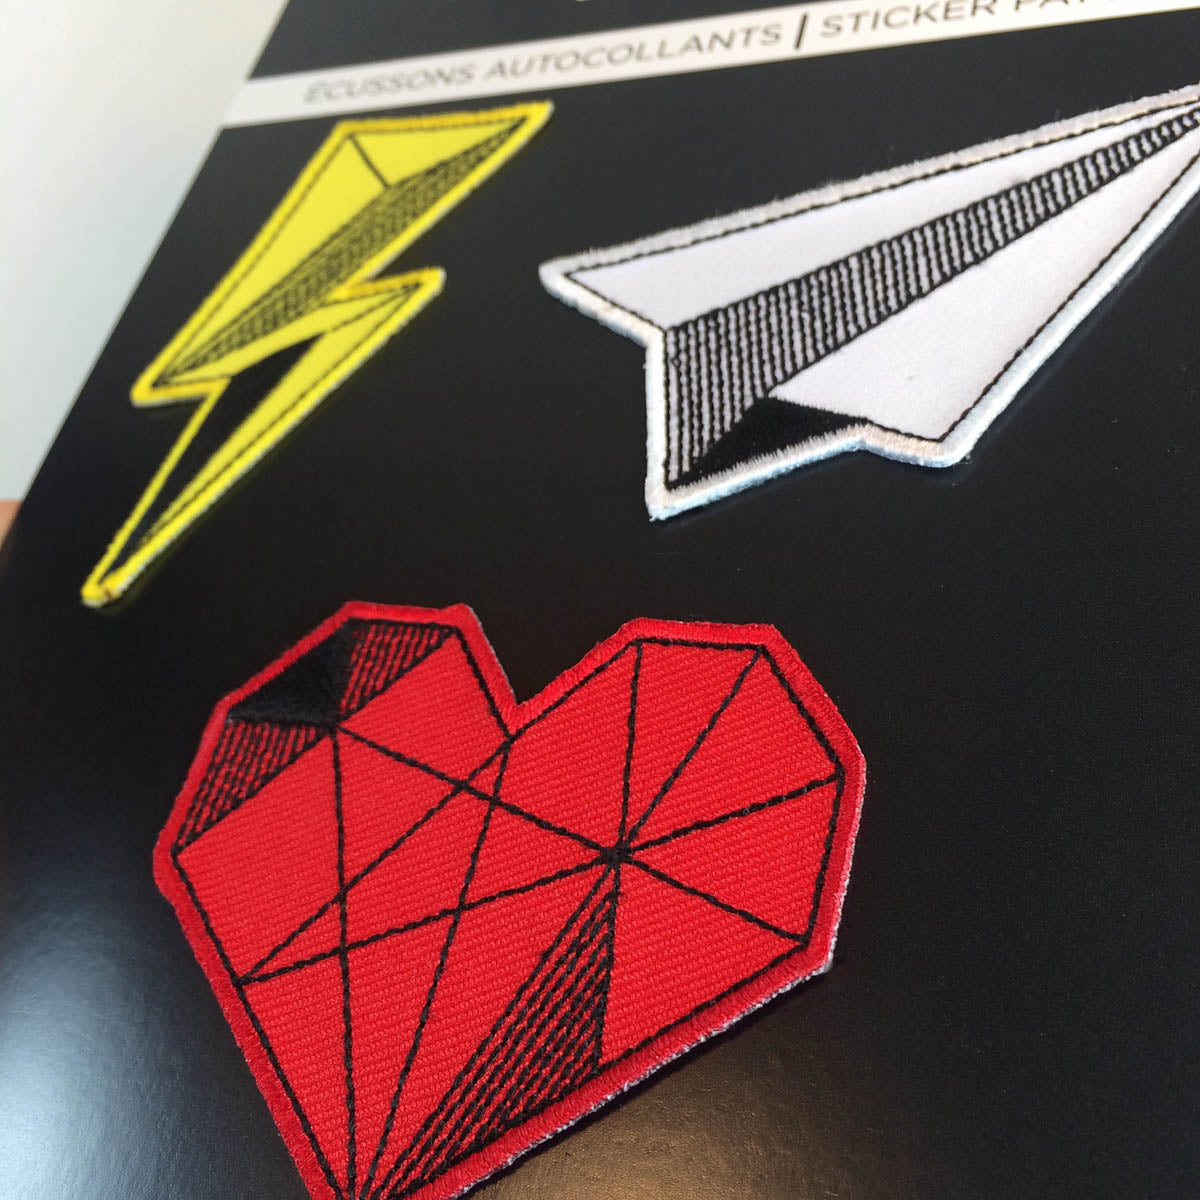 Geometric Patch Set #2 (3 patches) - Heart, Airplane, Lightning